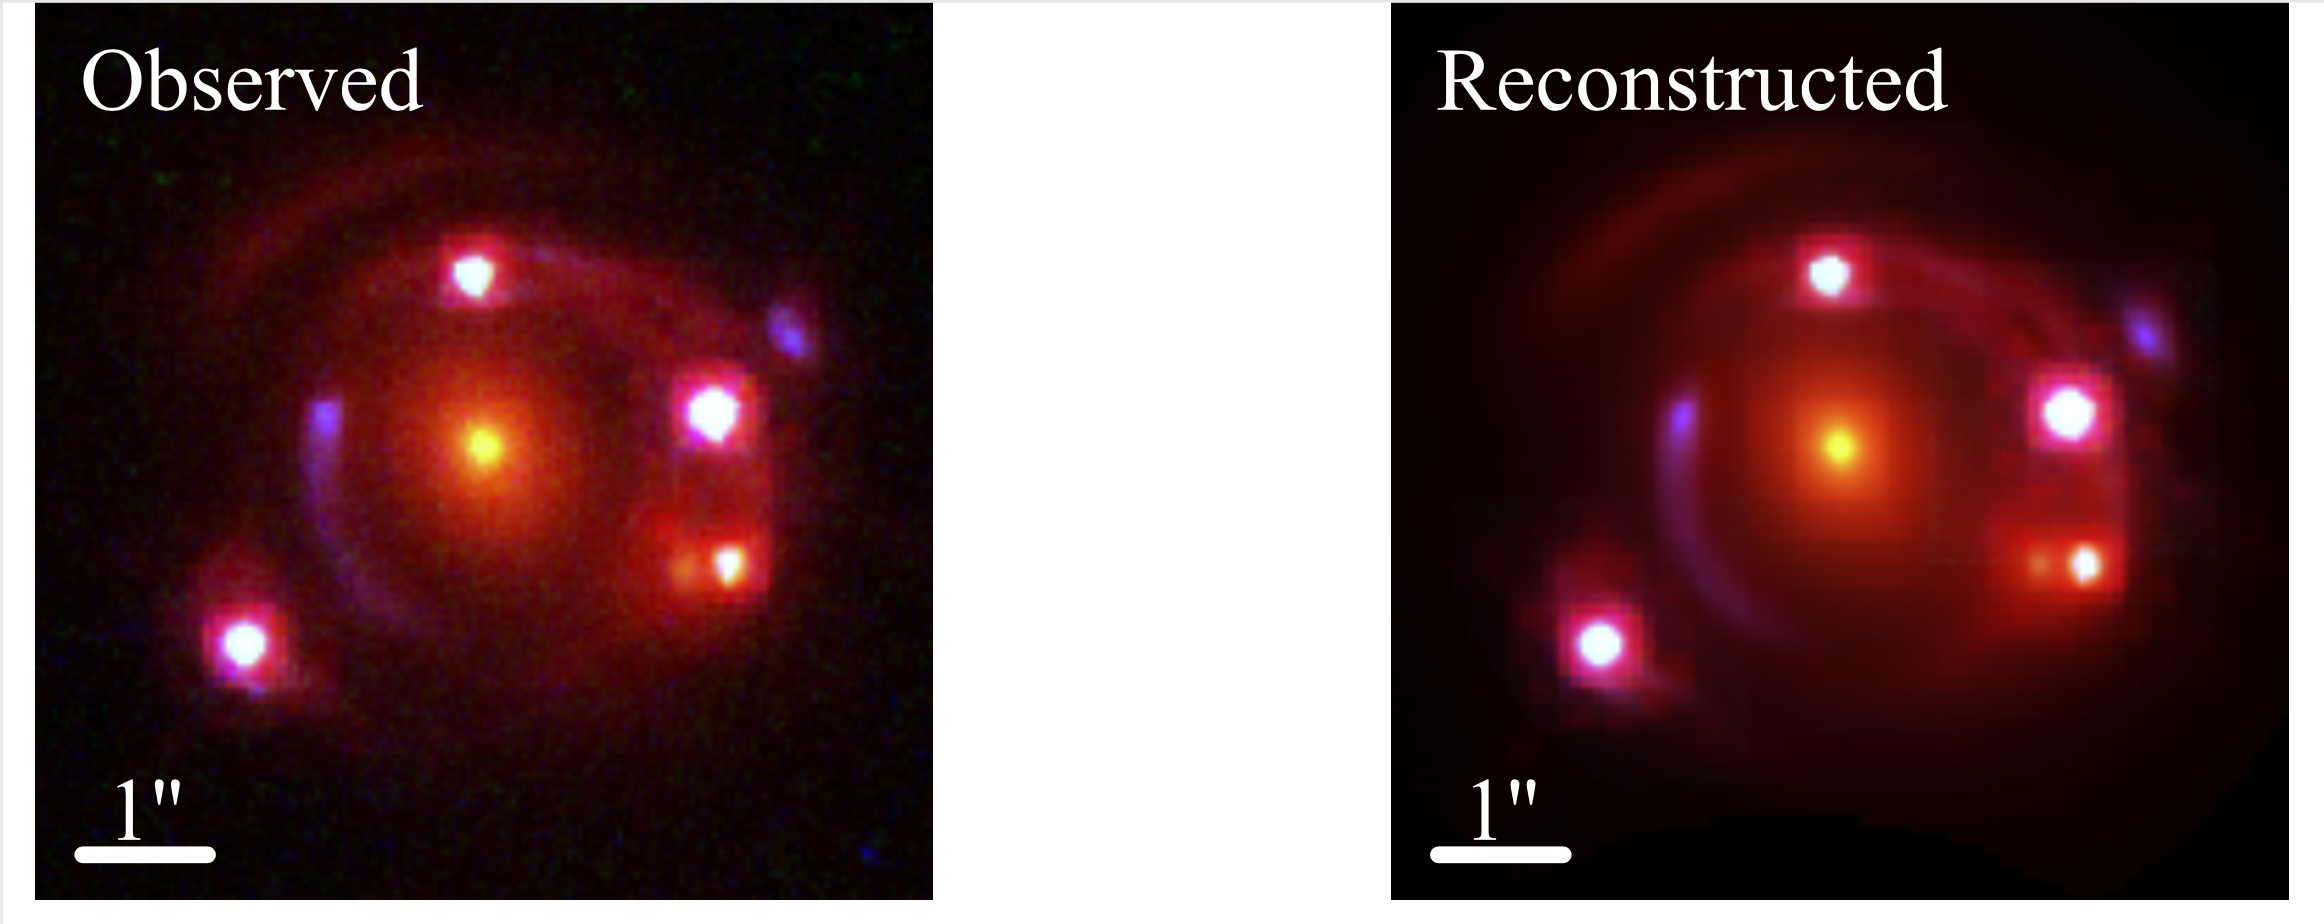 The figure shows the observed image (left) of the lens system from the Hubble Space Telescope, and our model-based reconstruction (right).